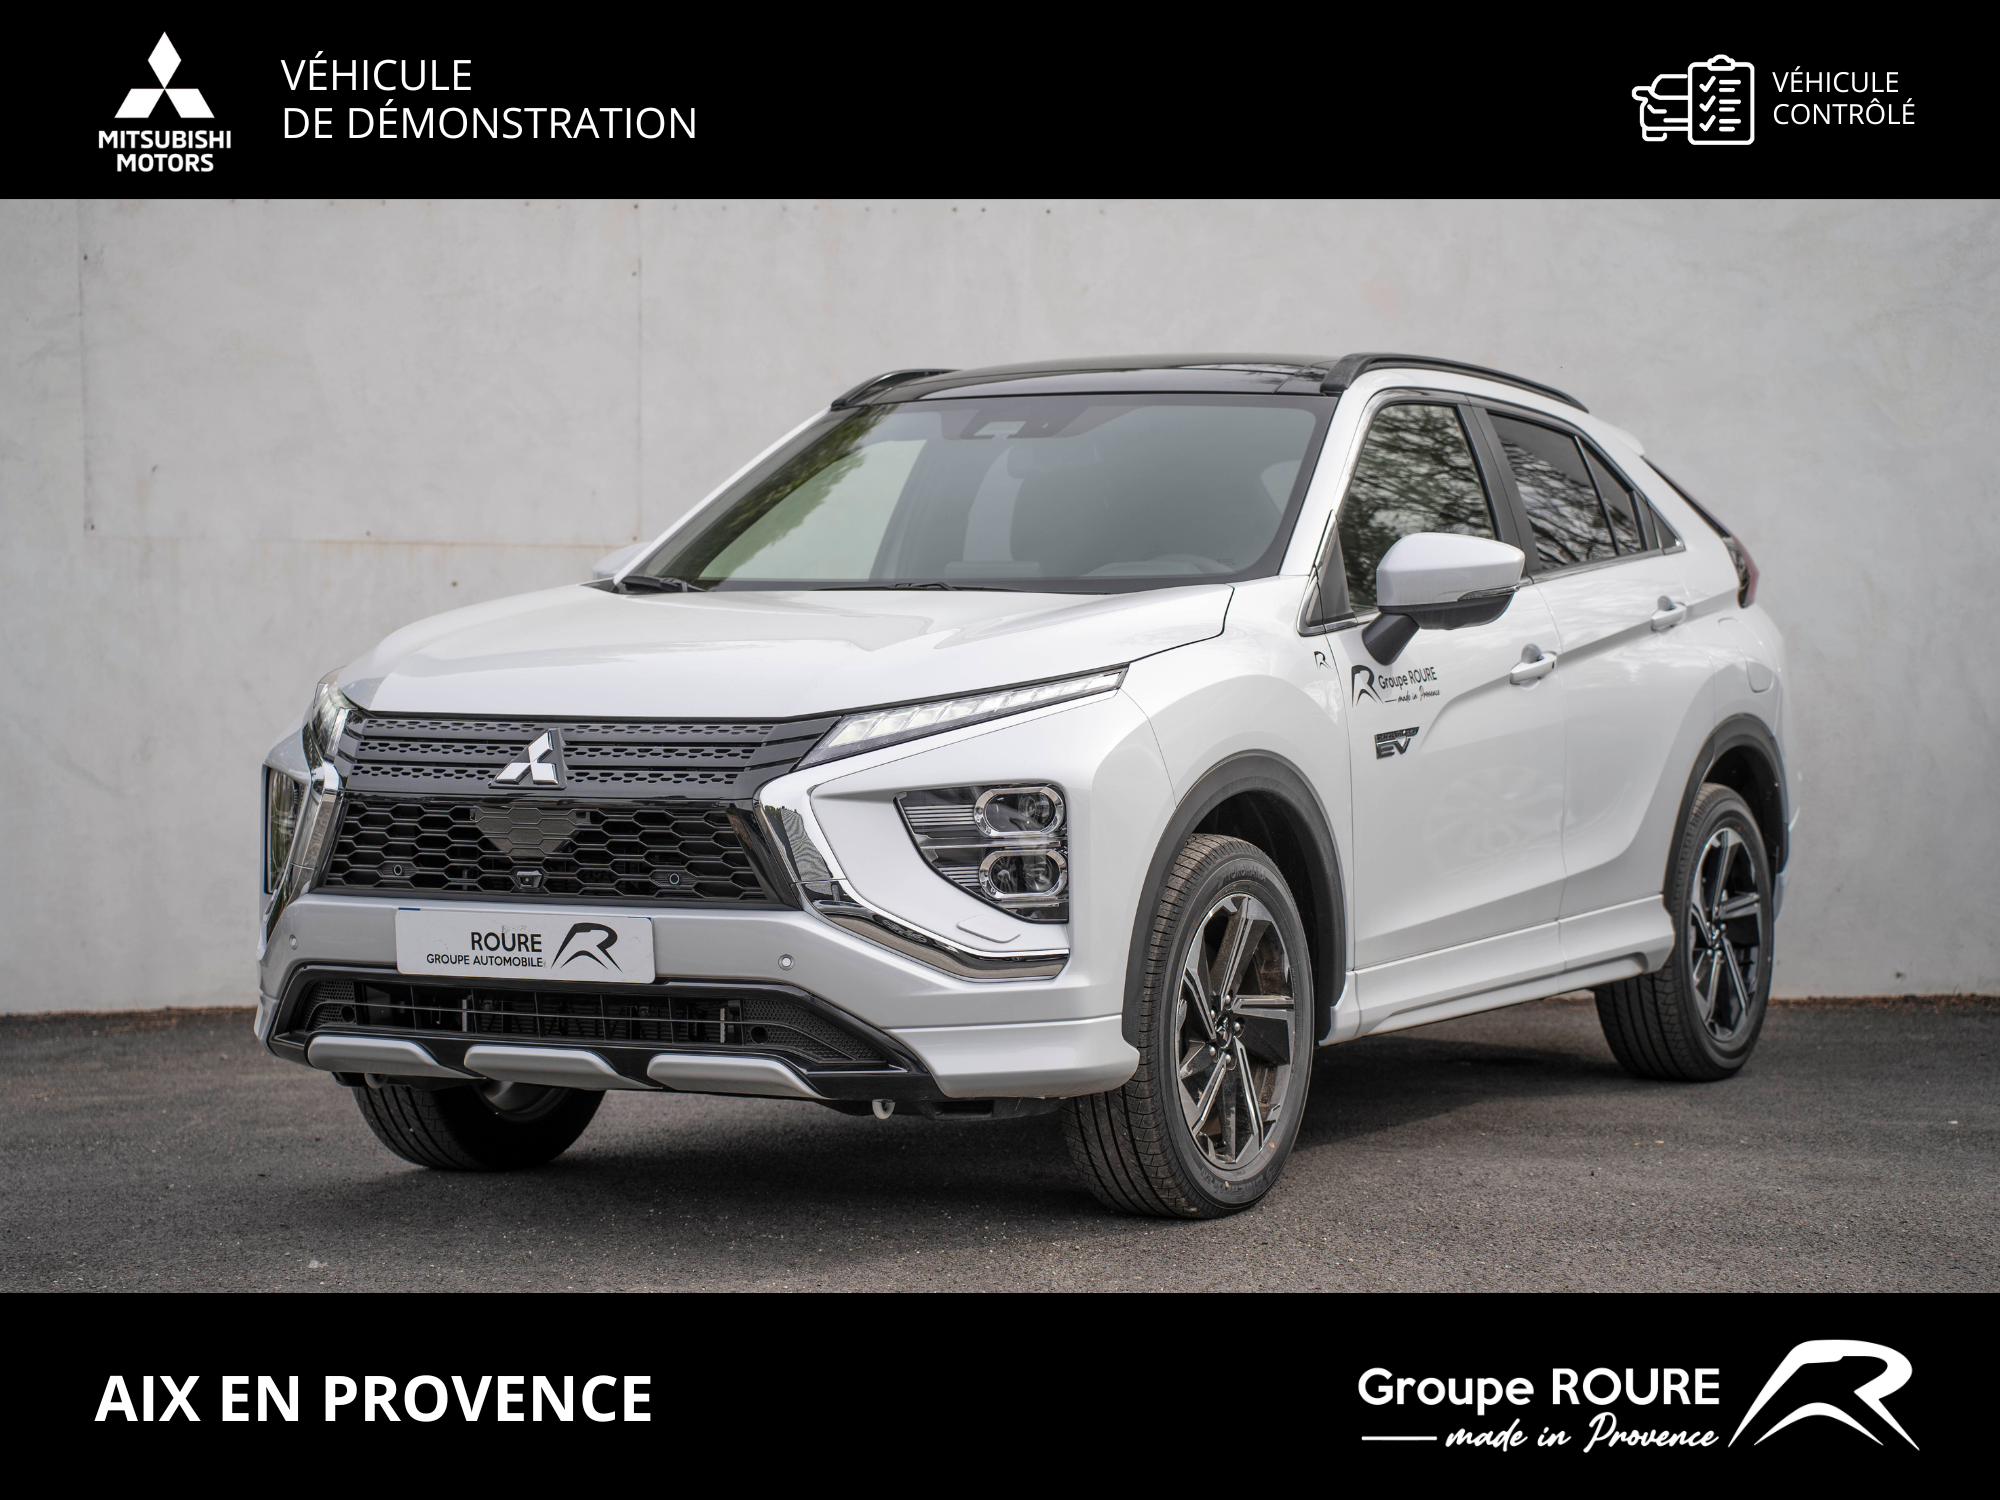 MITSUBISHI-ECLIPSE CROSS-Eclipse Cross 2.4 MIVEC PHEV Twin Motor 4WD-Instyle-50340-7000-roure-automobiles